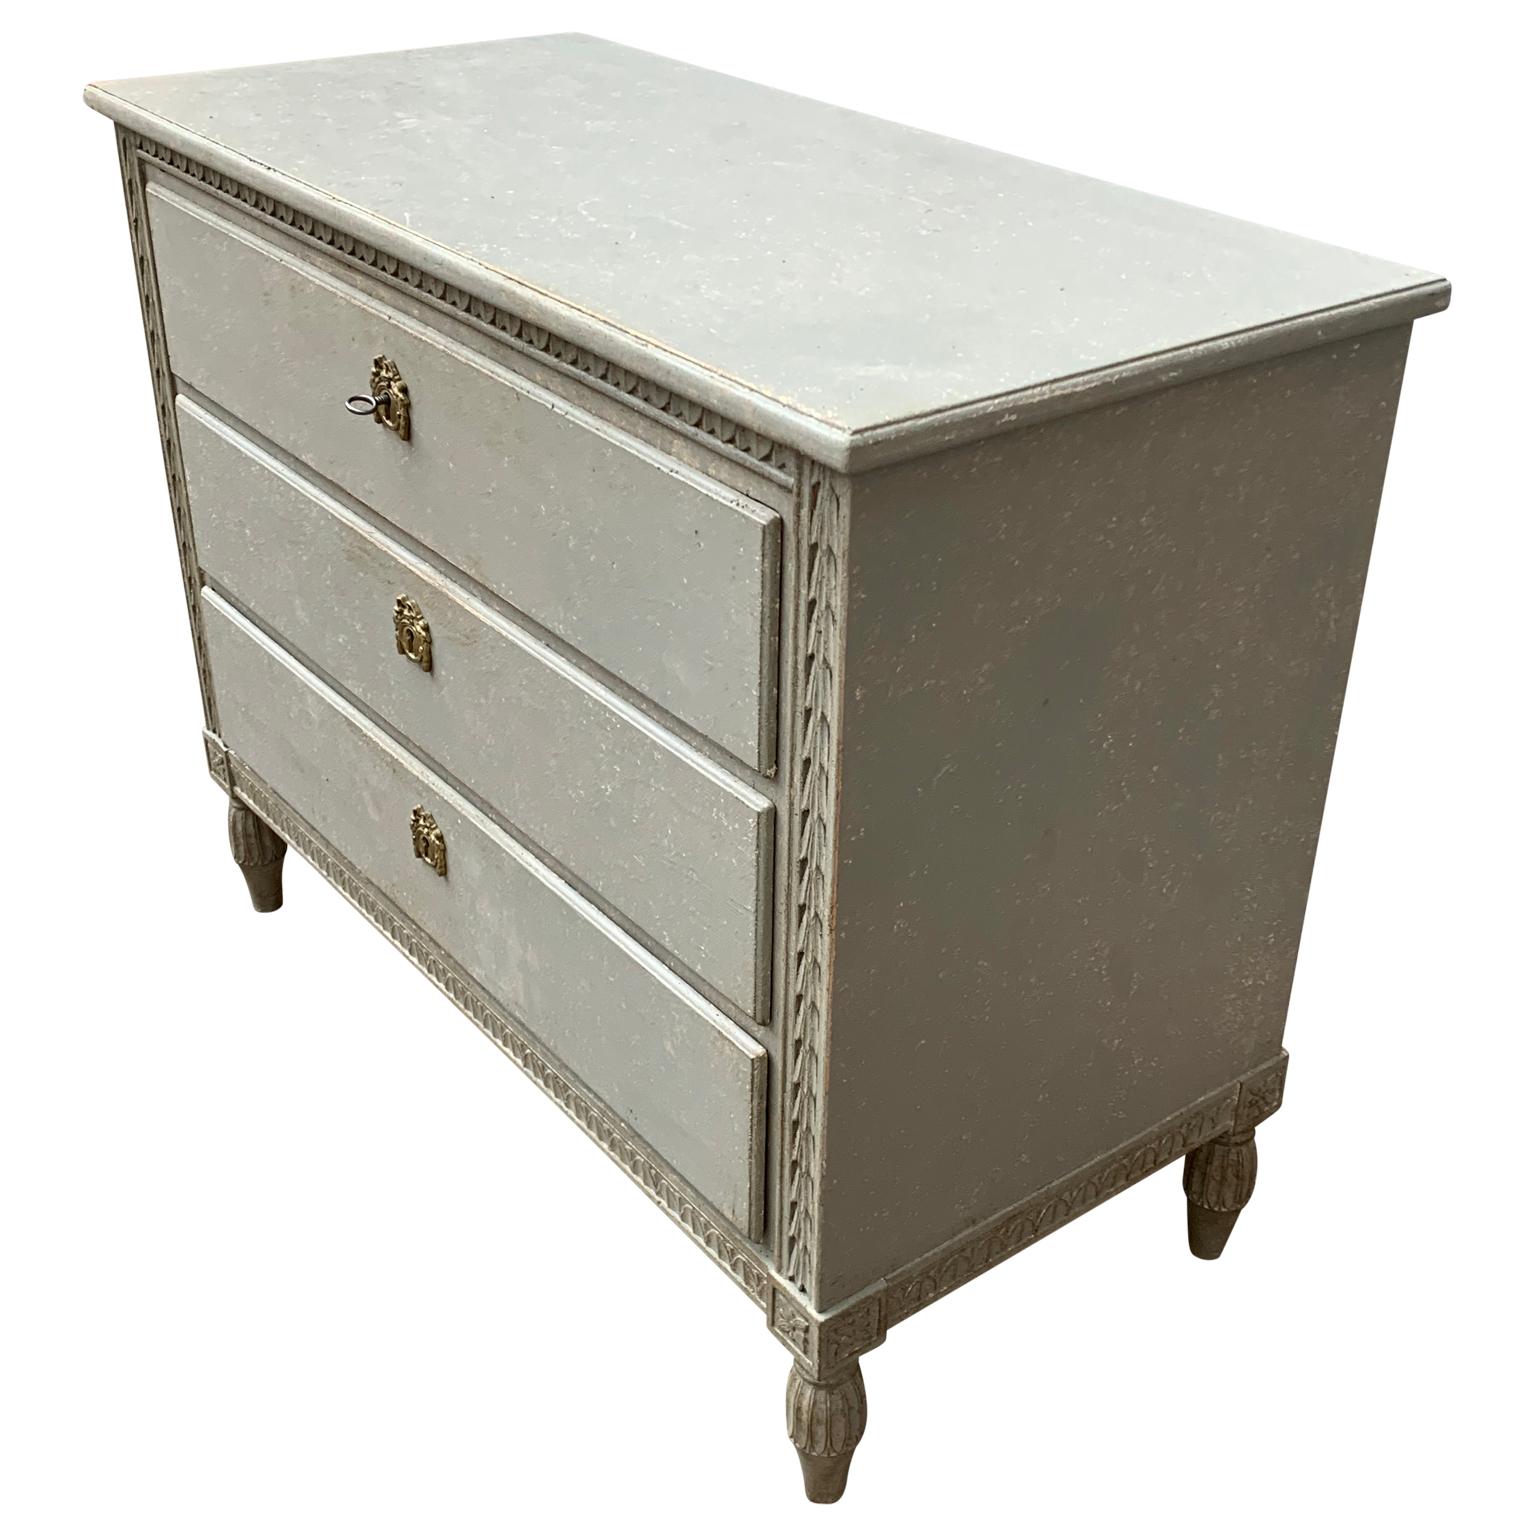 Hand-Painted Gustavian Style Painted 3 Drawer Dresser From Sweden